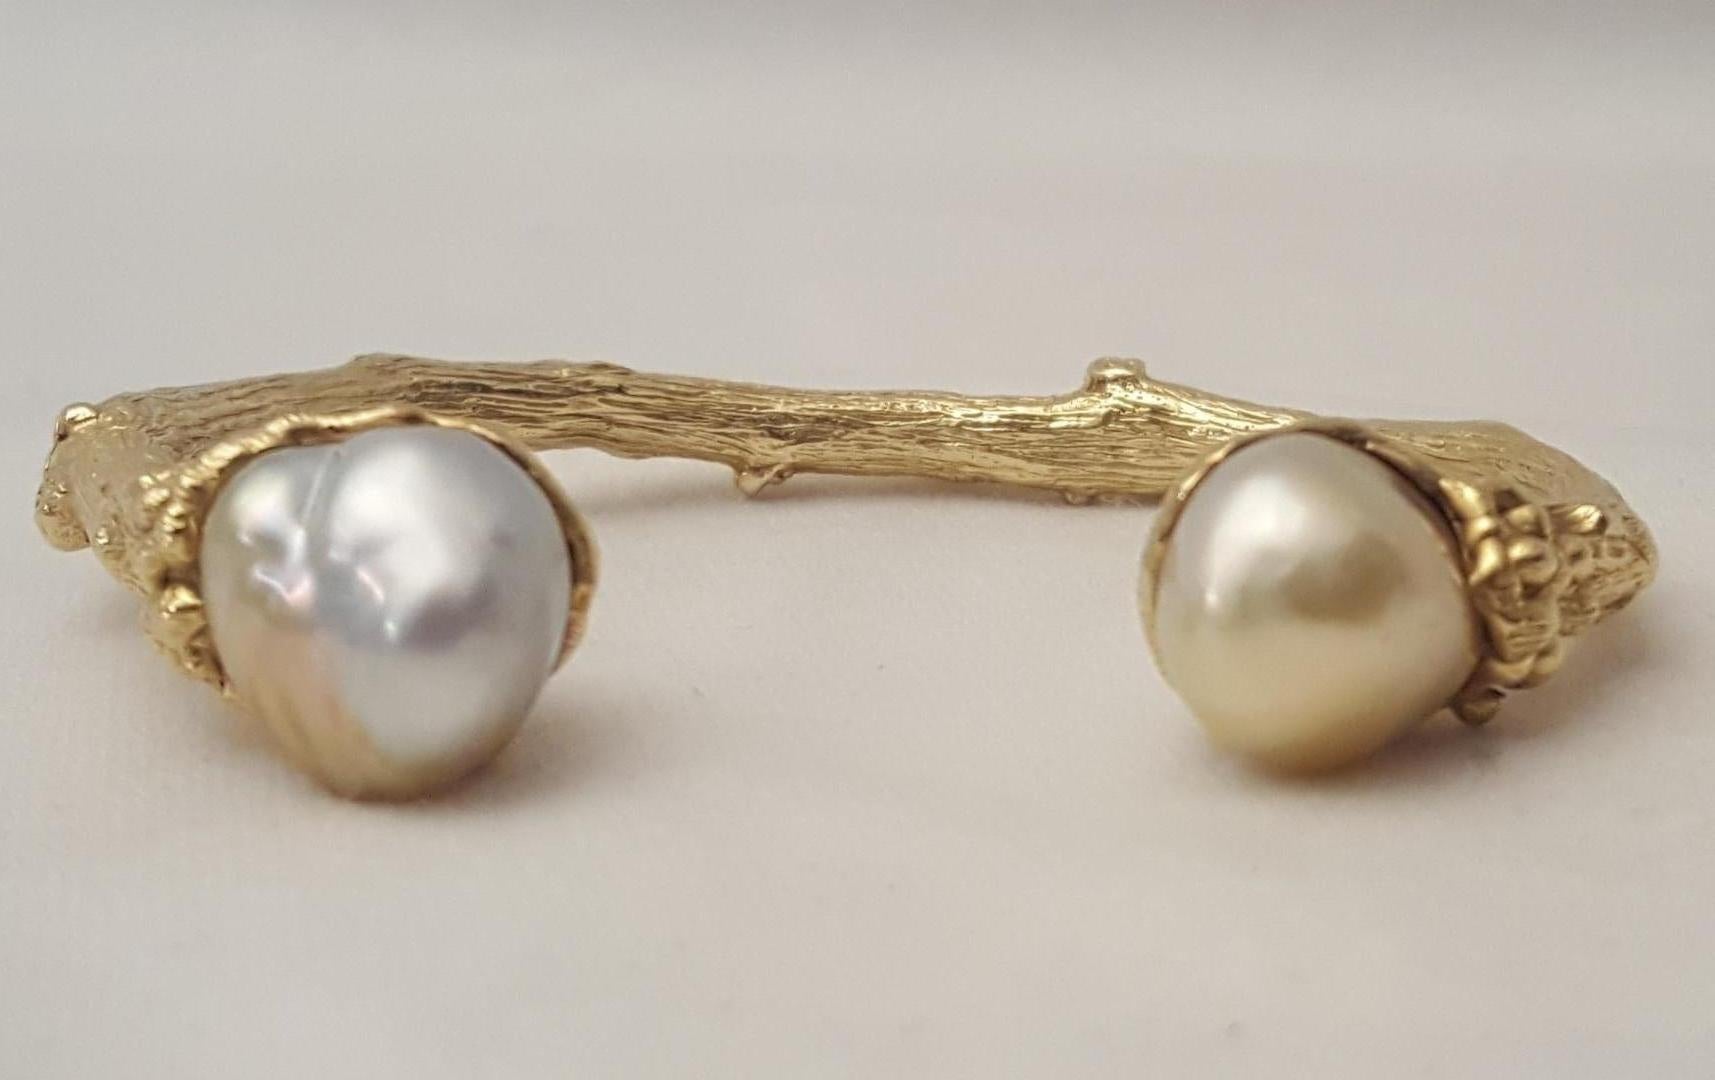 Stunning bracelet crafted in 18 karat yellow gold.  This piece is Solid, weighing in at an impressive 50.5 grams!  A curved, heavily detailed 'branch' design curves upward to present two baroque pearls sitting in cup like leaves.  Pearls are white